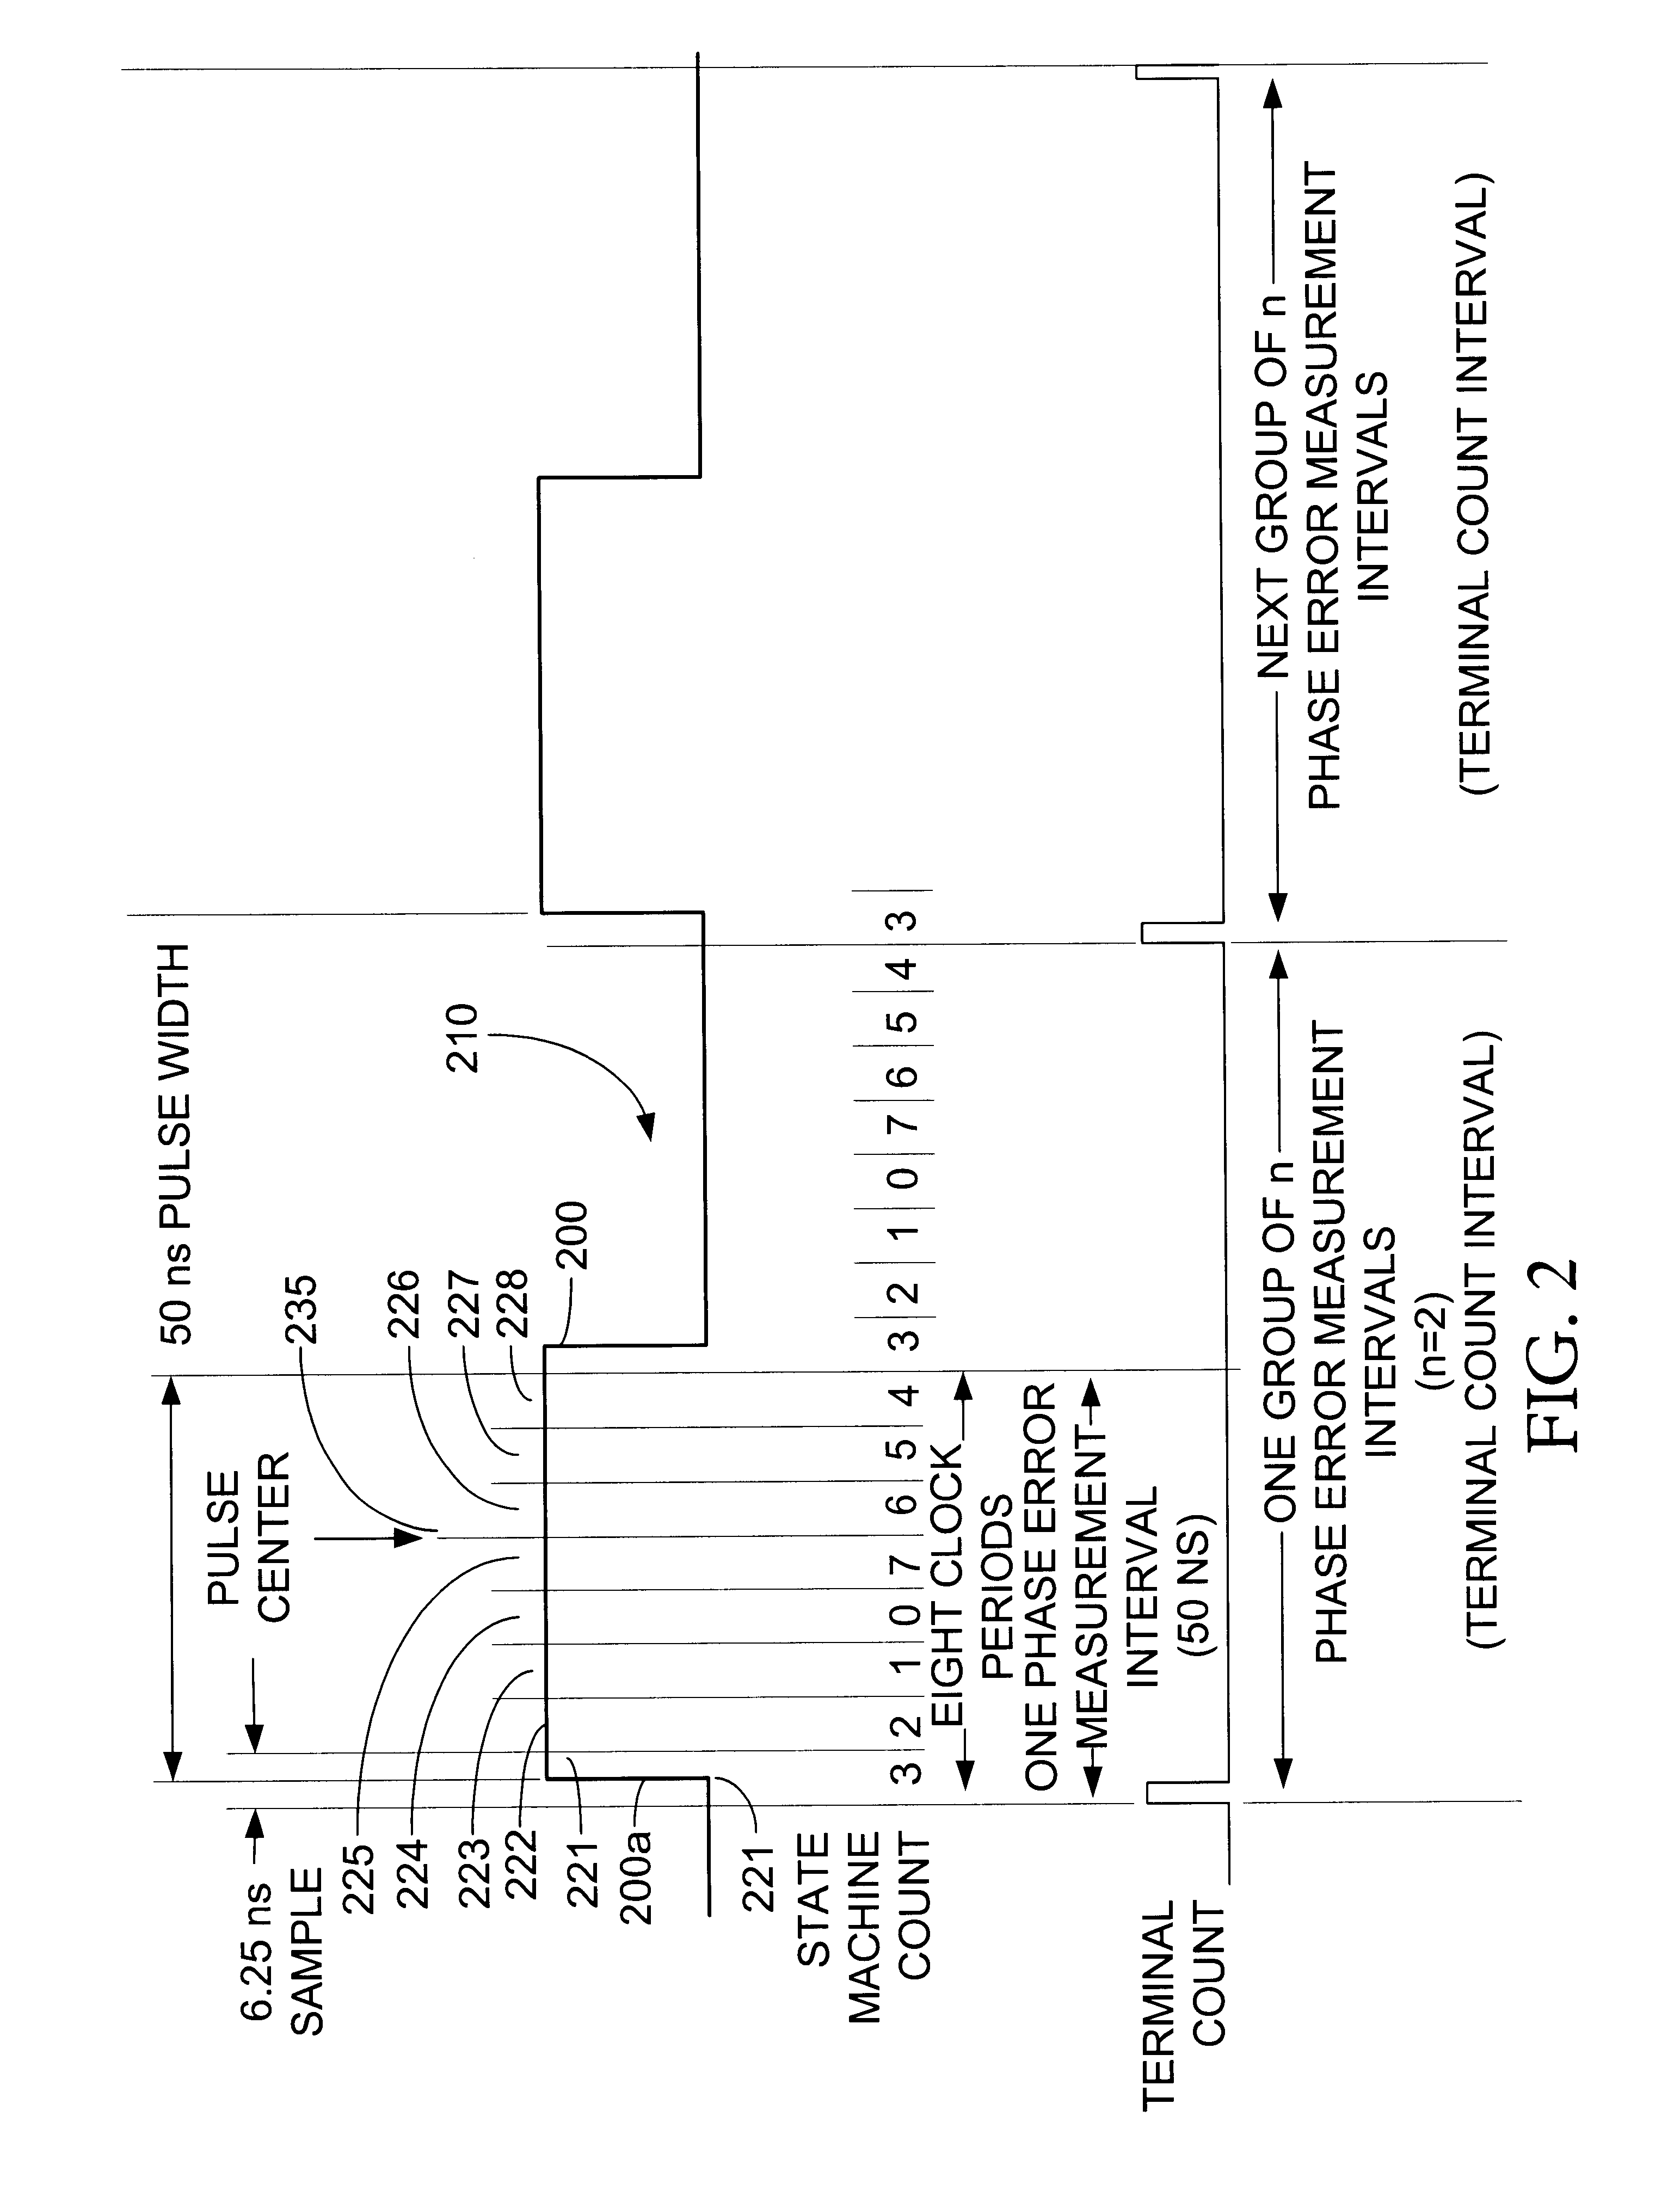 Digital receive phase lock loop with cumulative phase error correction and dynamically programmable correction rate